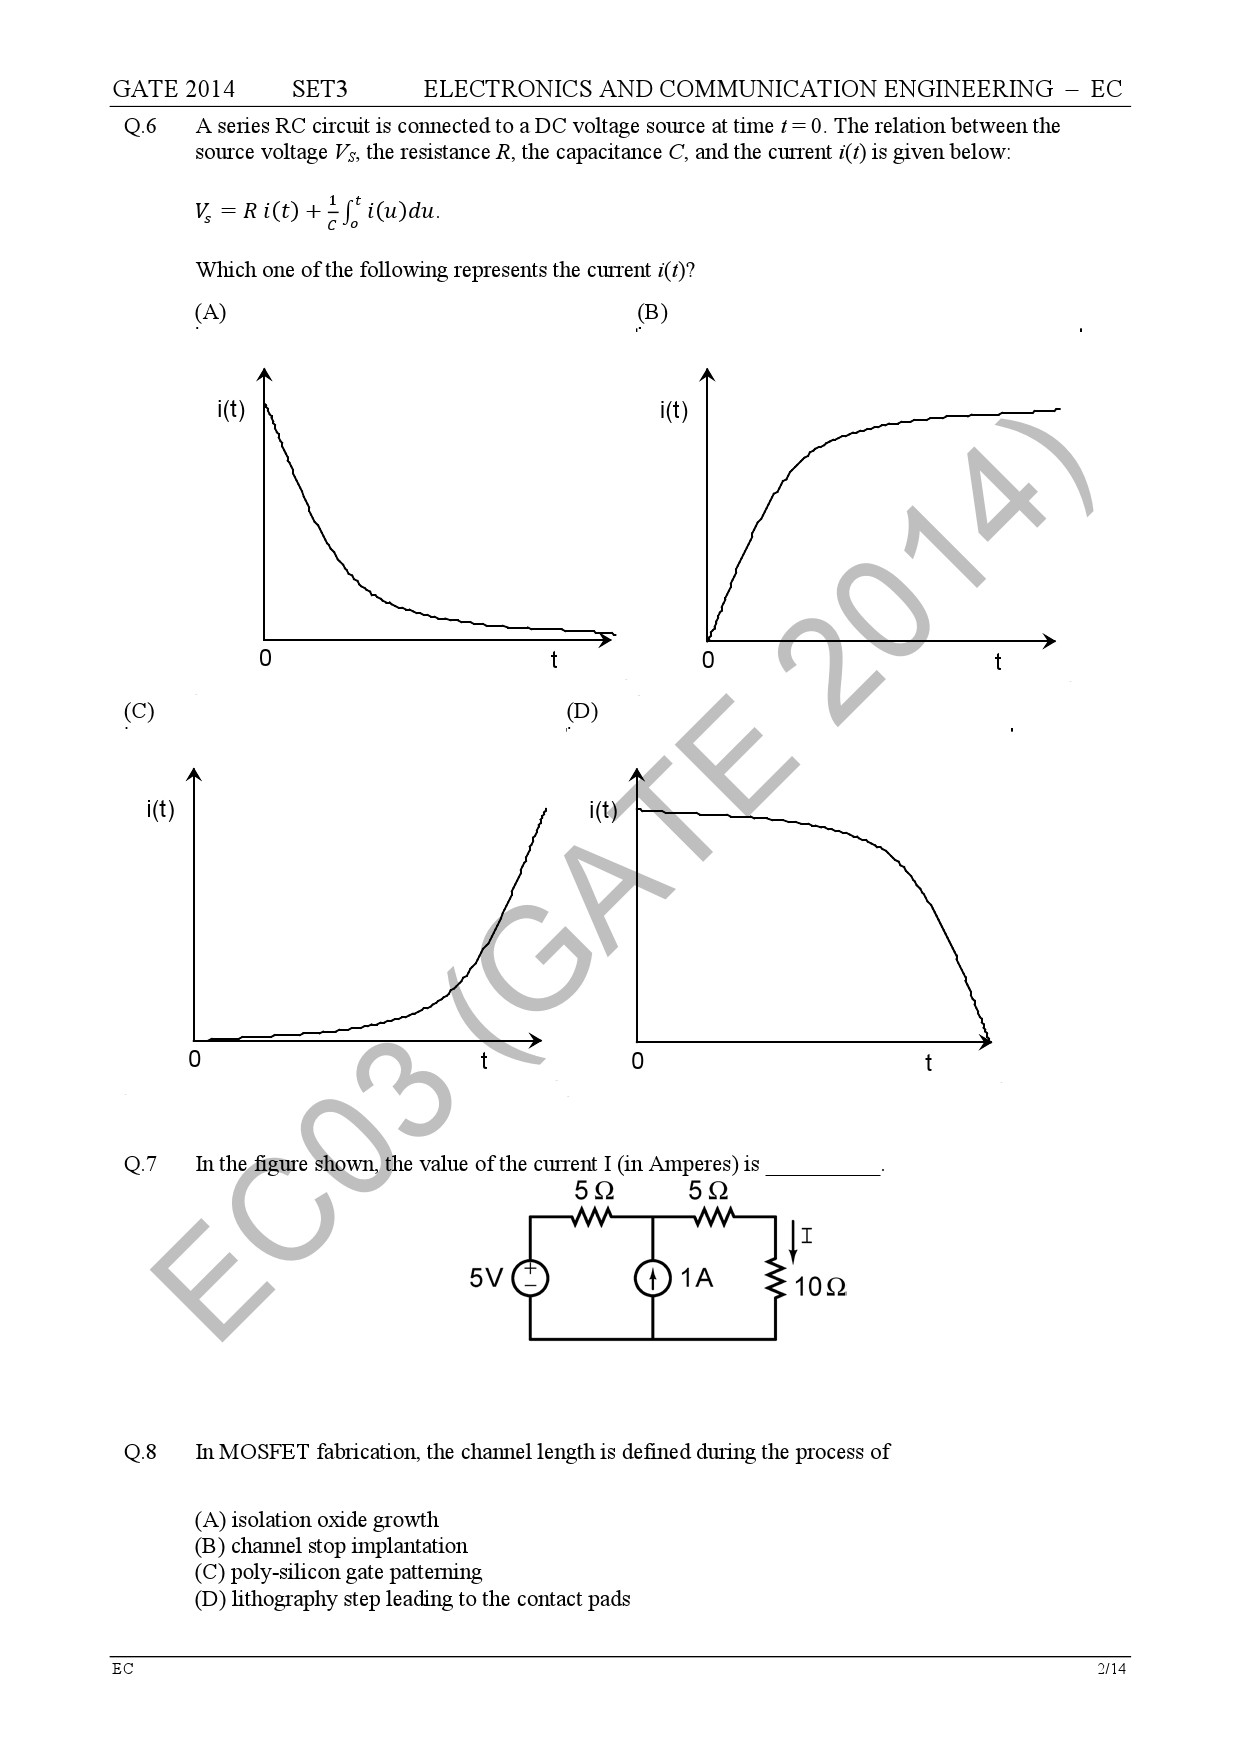 GATE Exam Question Paper 2014 Electronics and Communication Engineering Set 3 9